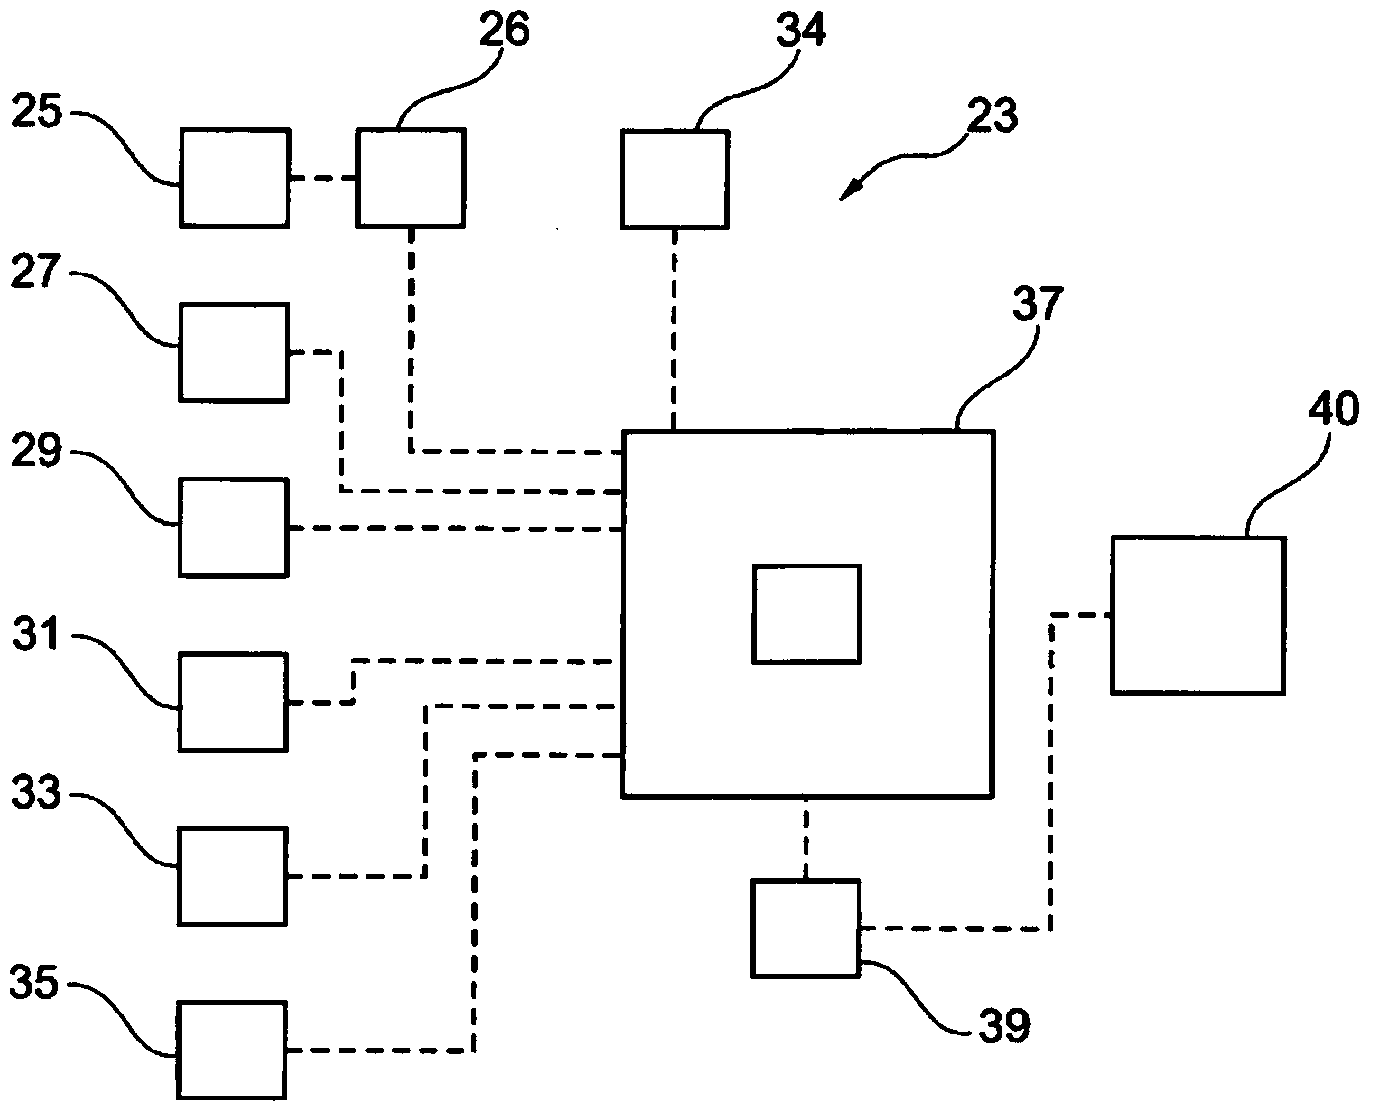 Computer network for monitoring and controlling storage facilities comprising load state device and user detection device